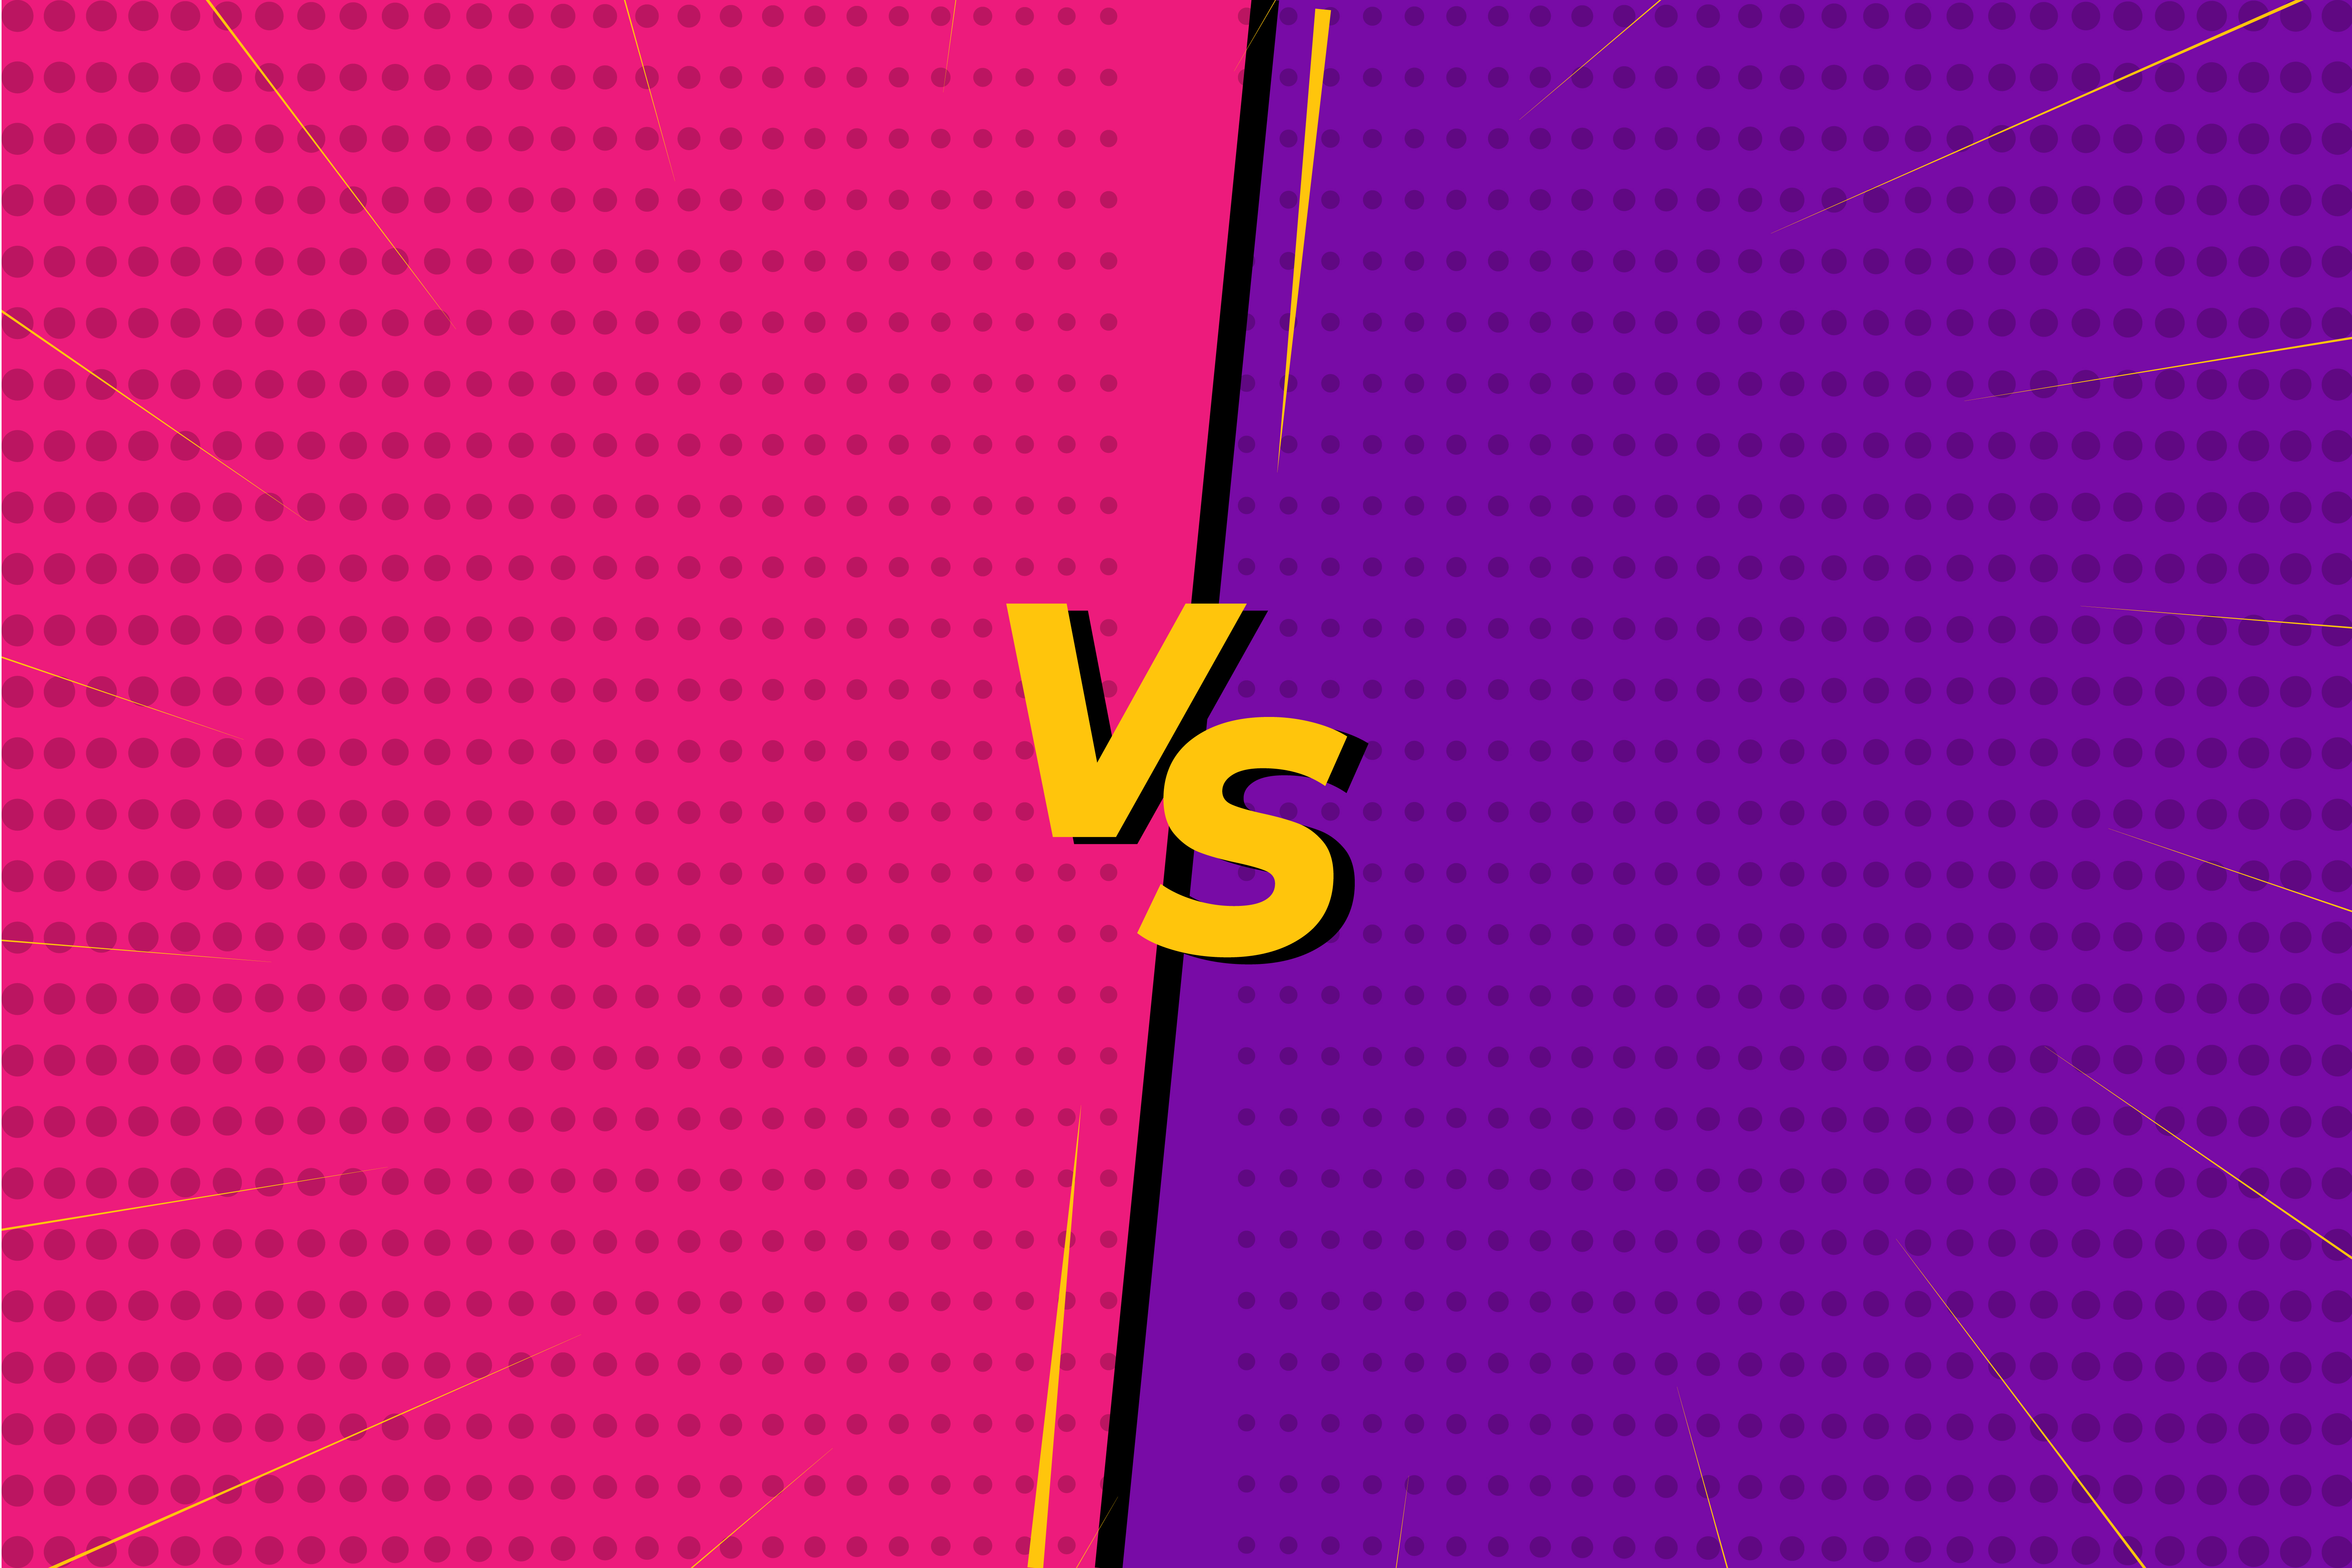 Free Vector  Versus vs battle screen red and blue background